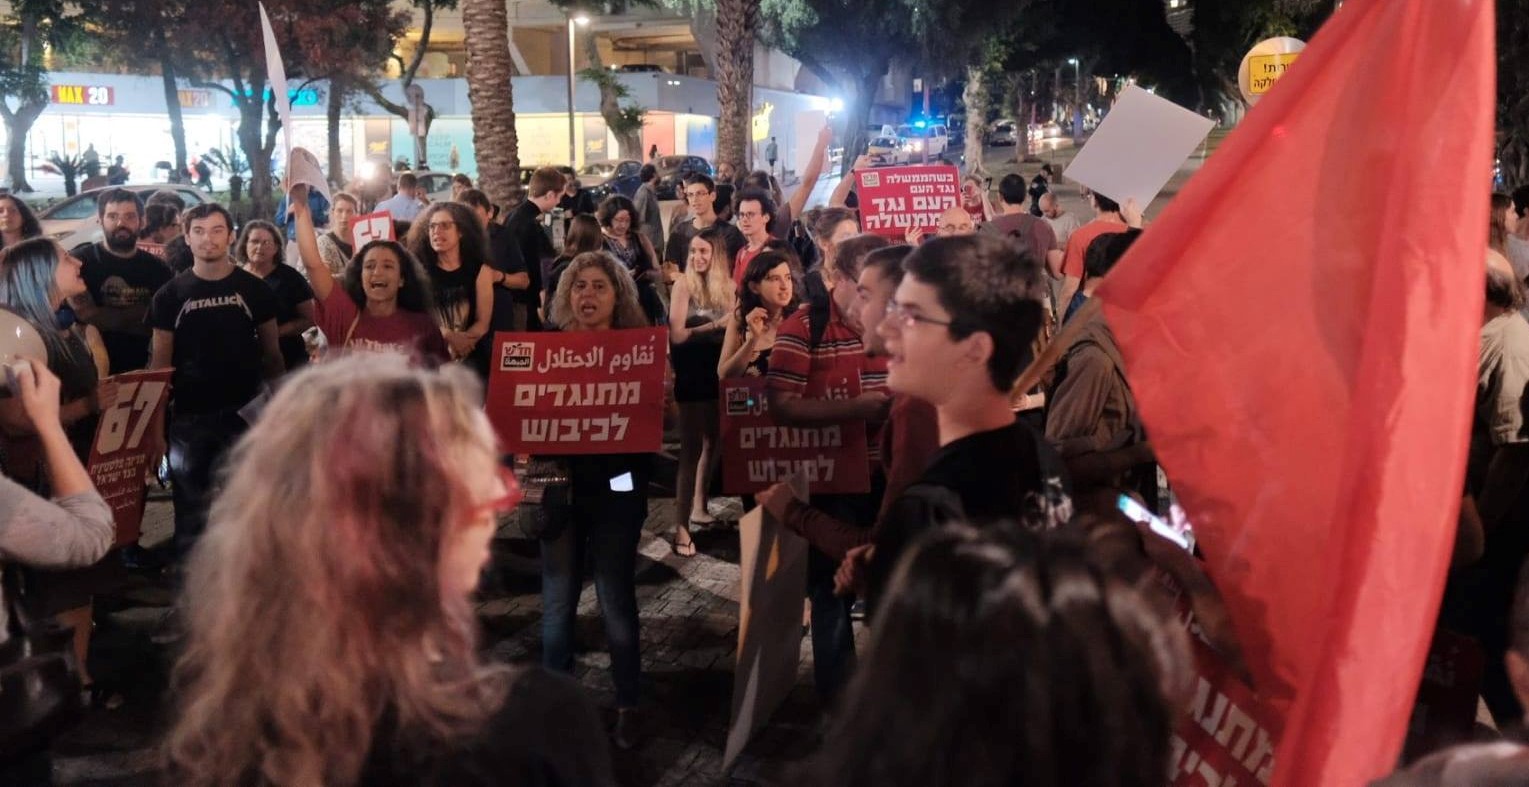 Demonstrators near the Likud headquarters in Central Tel Aviv Tuesday evening, November 12, brandish Hadash placards and call for an end to Israel's occupation of the Palestinian territories and a halt to its blockade of Gaza.